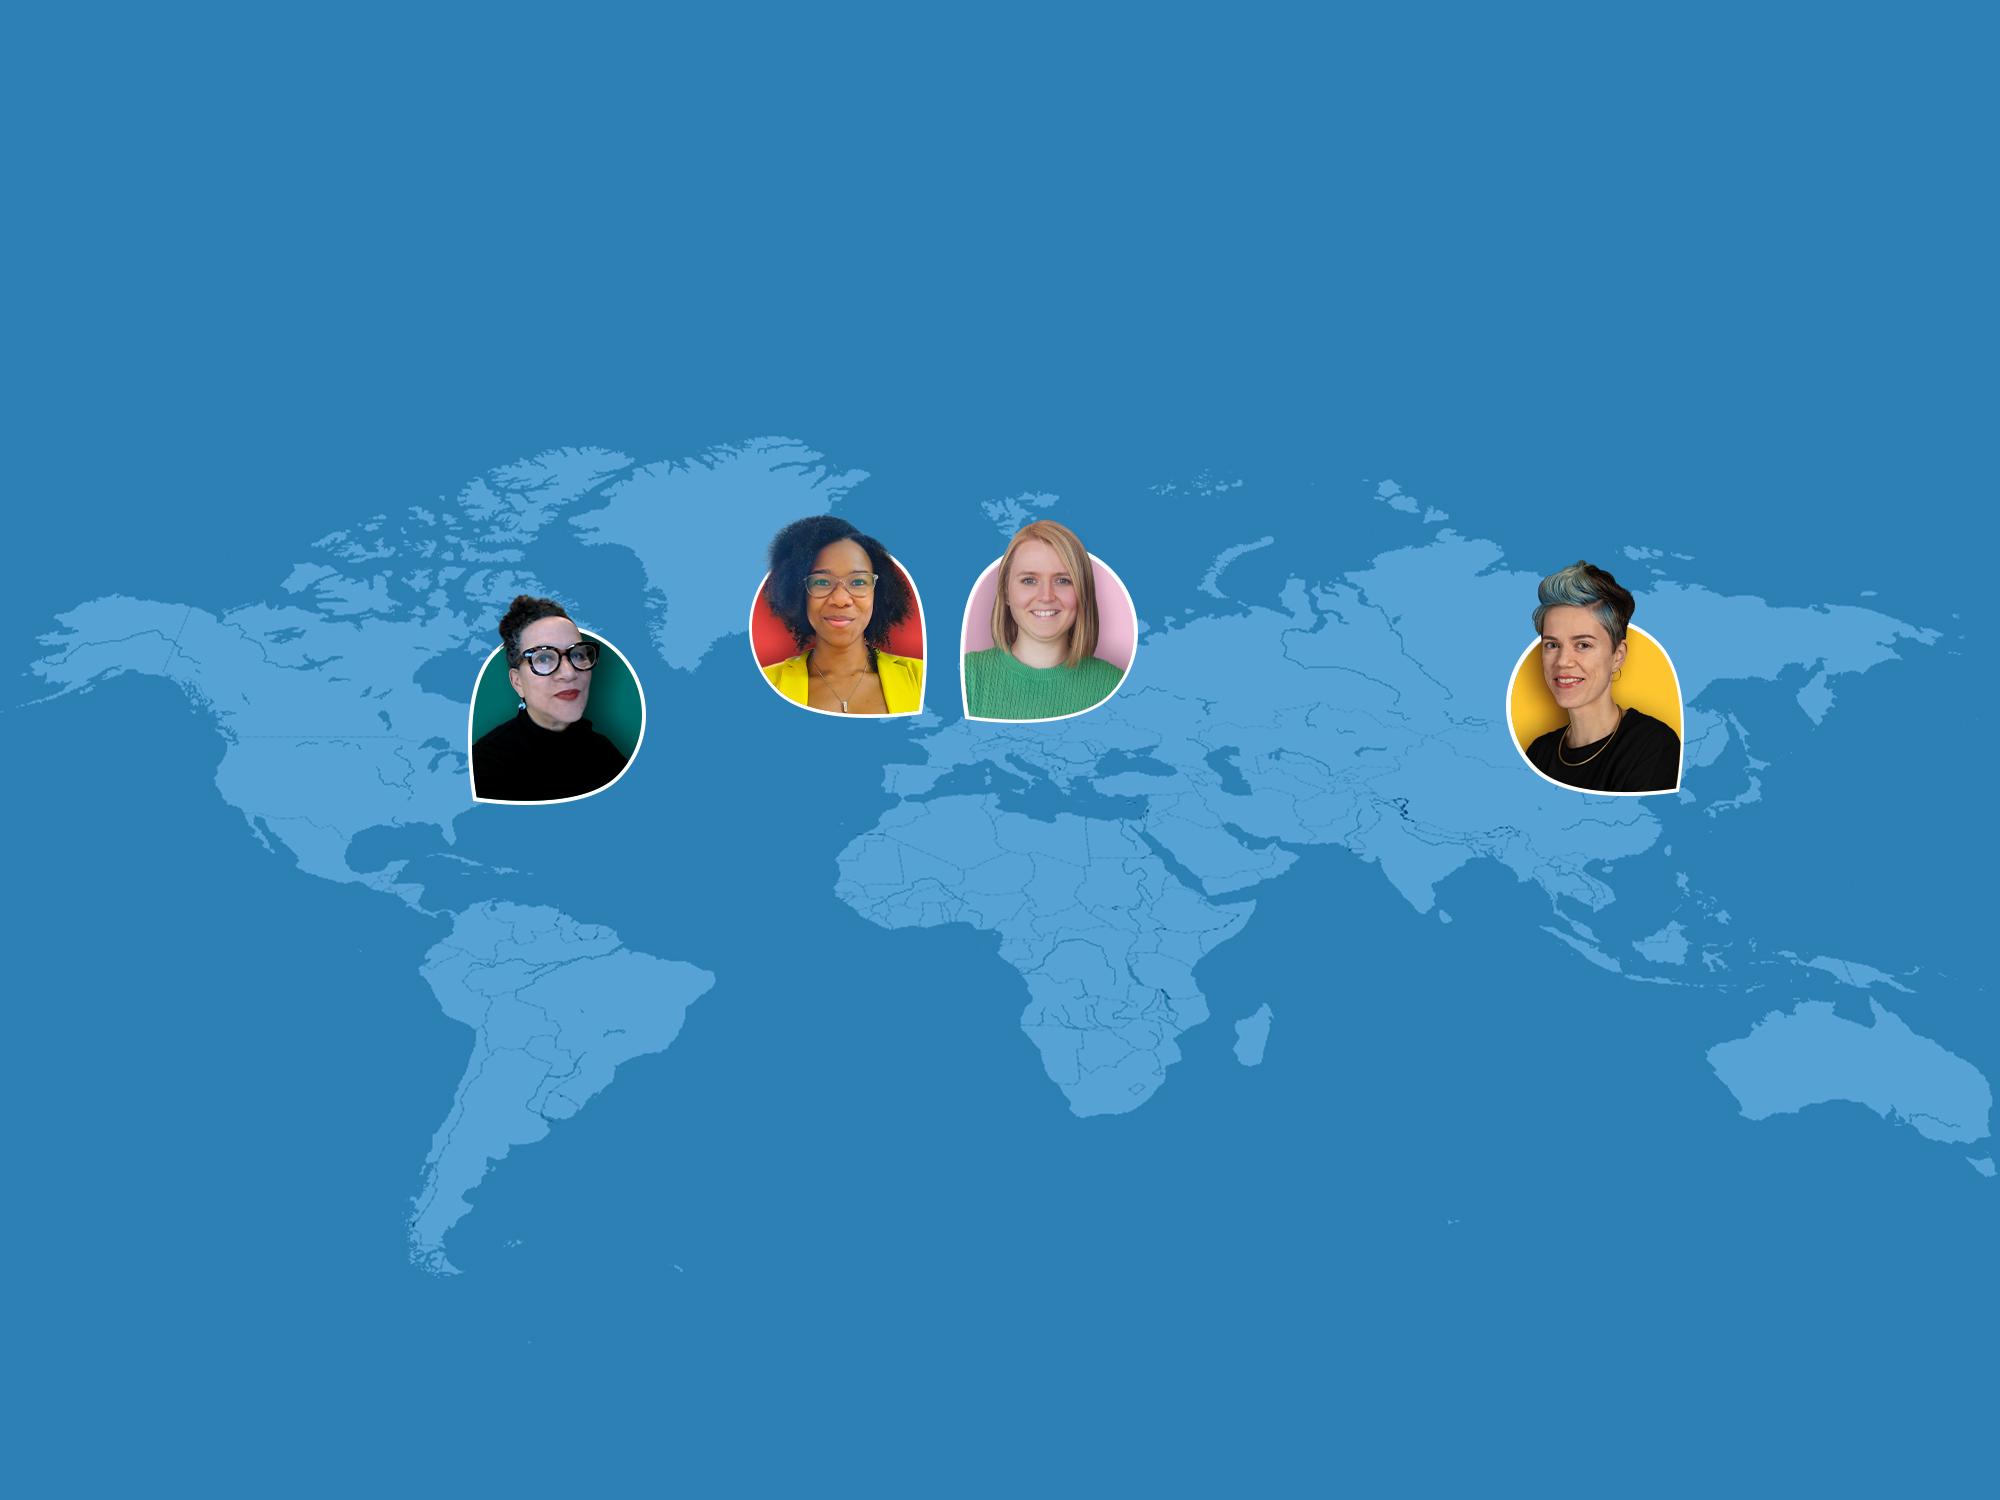 World map with pins of headshots of women mapmakers across the globe